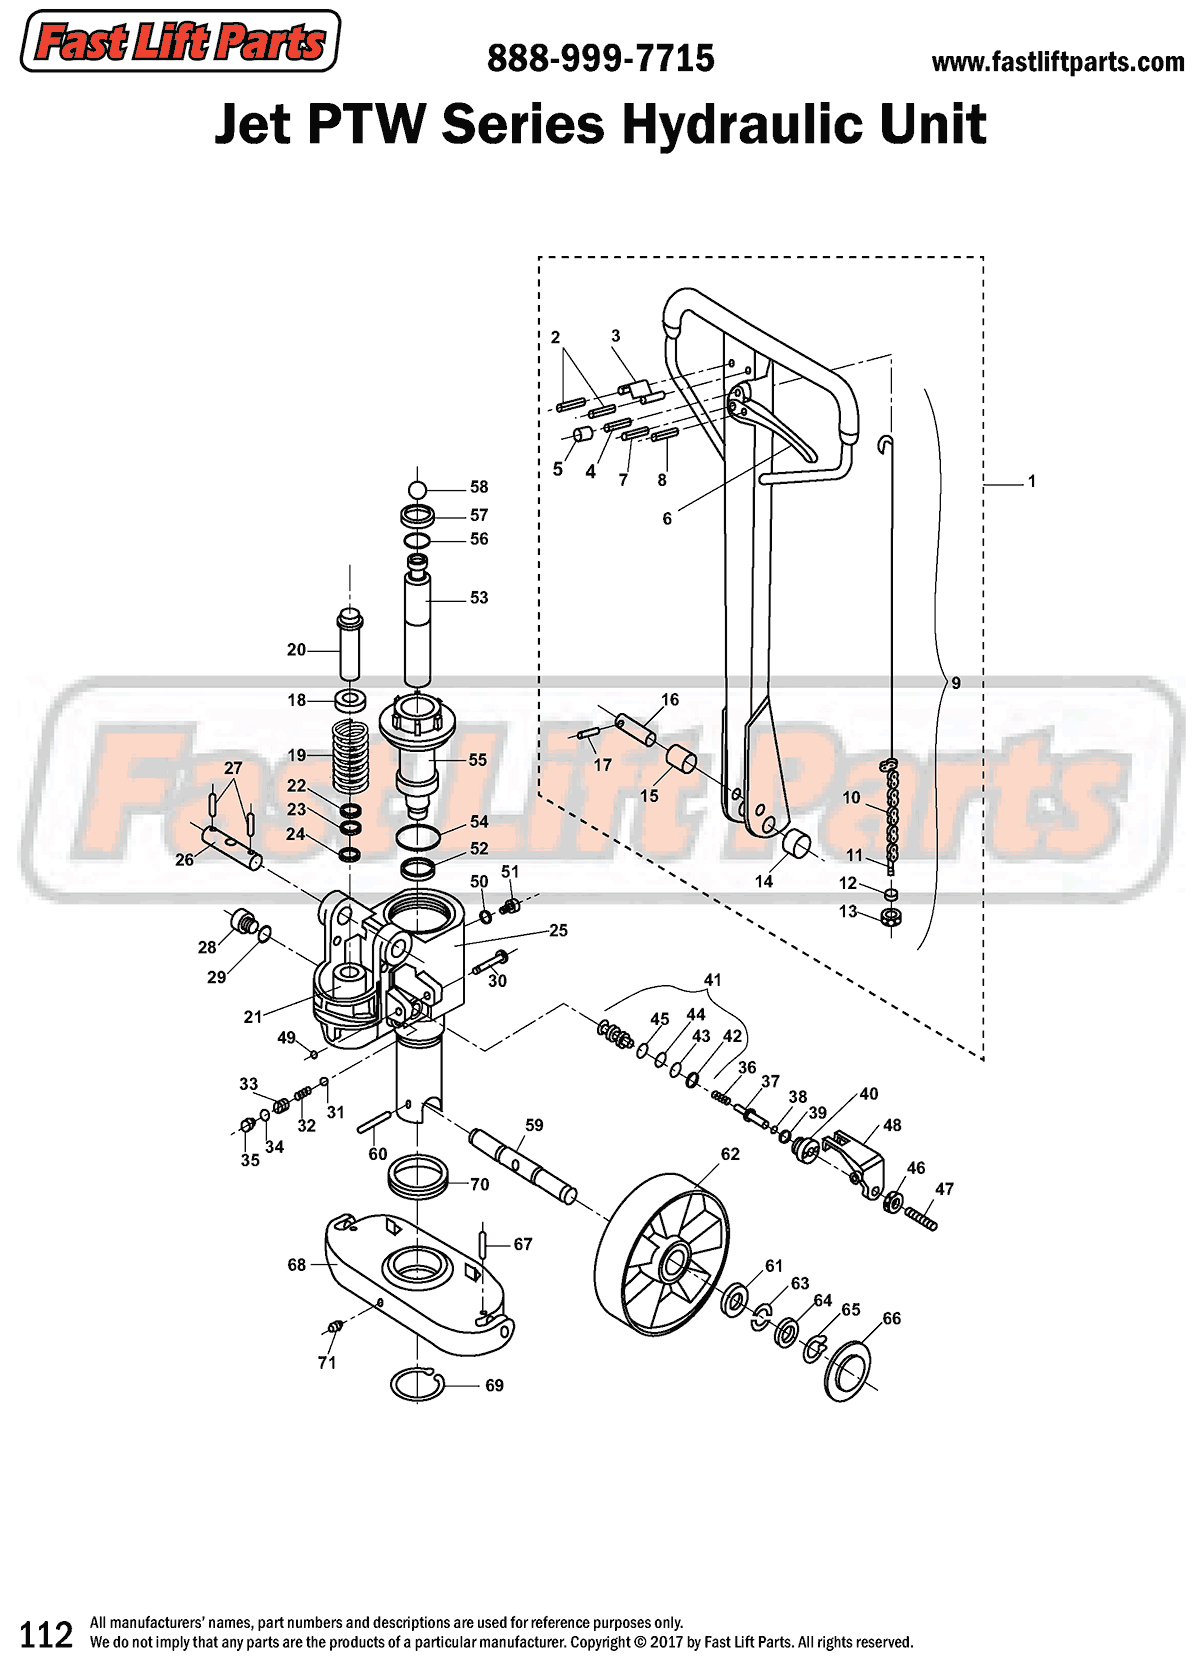 Jet PTW Series Hydraulic Unit Line Drawing